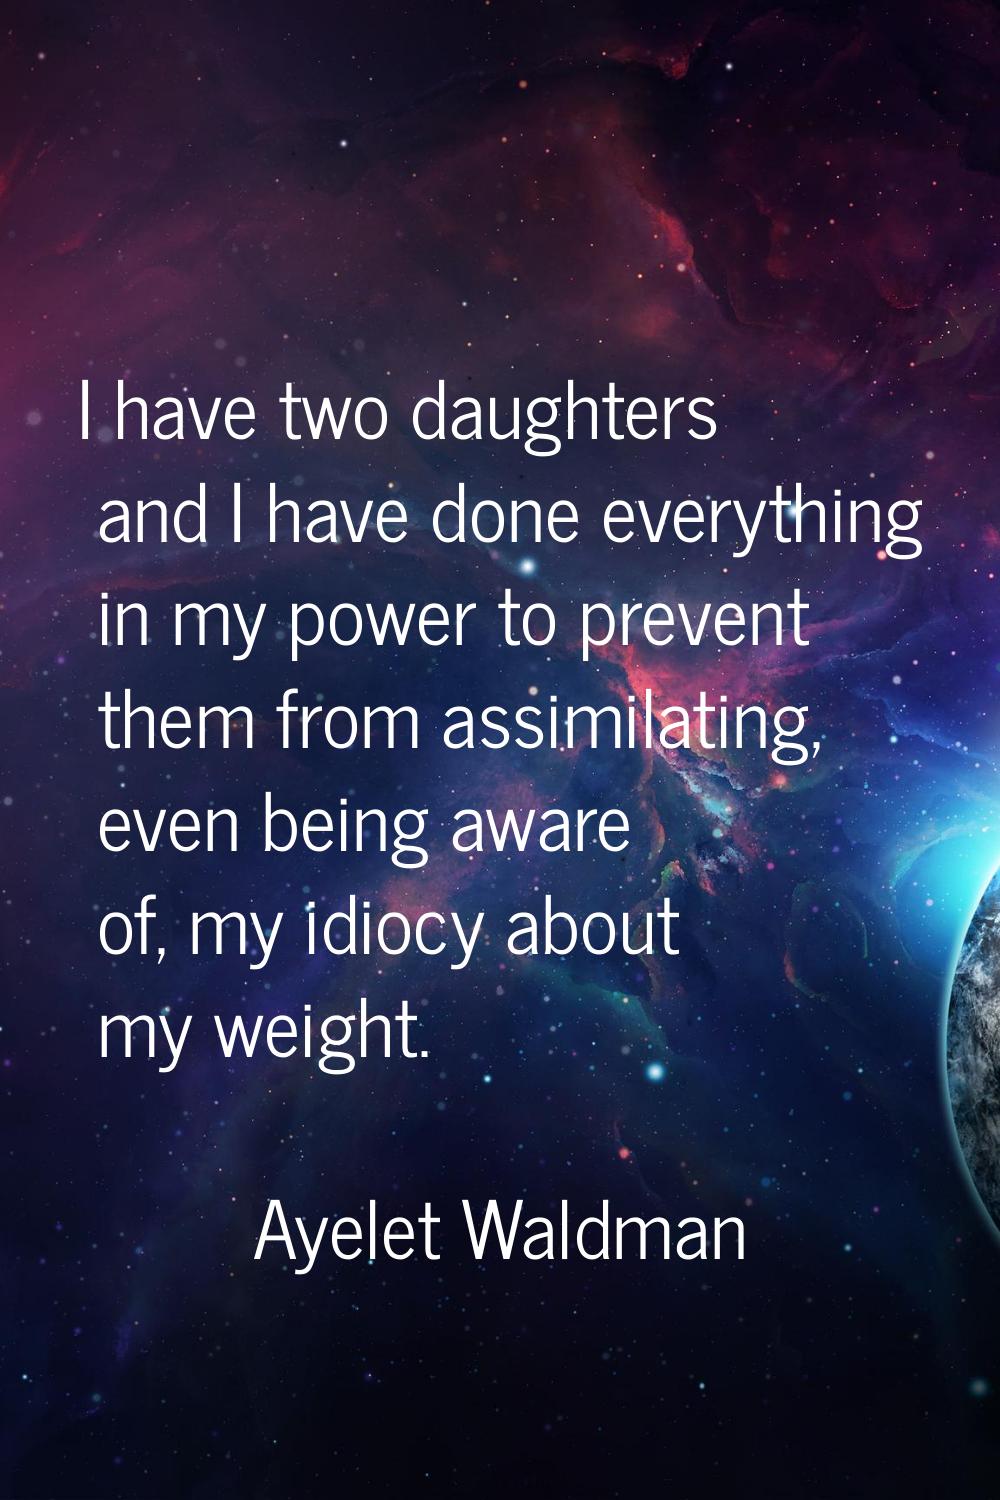 I have two daughters and I have done everything in my power to prevent them from assimilating, even